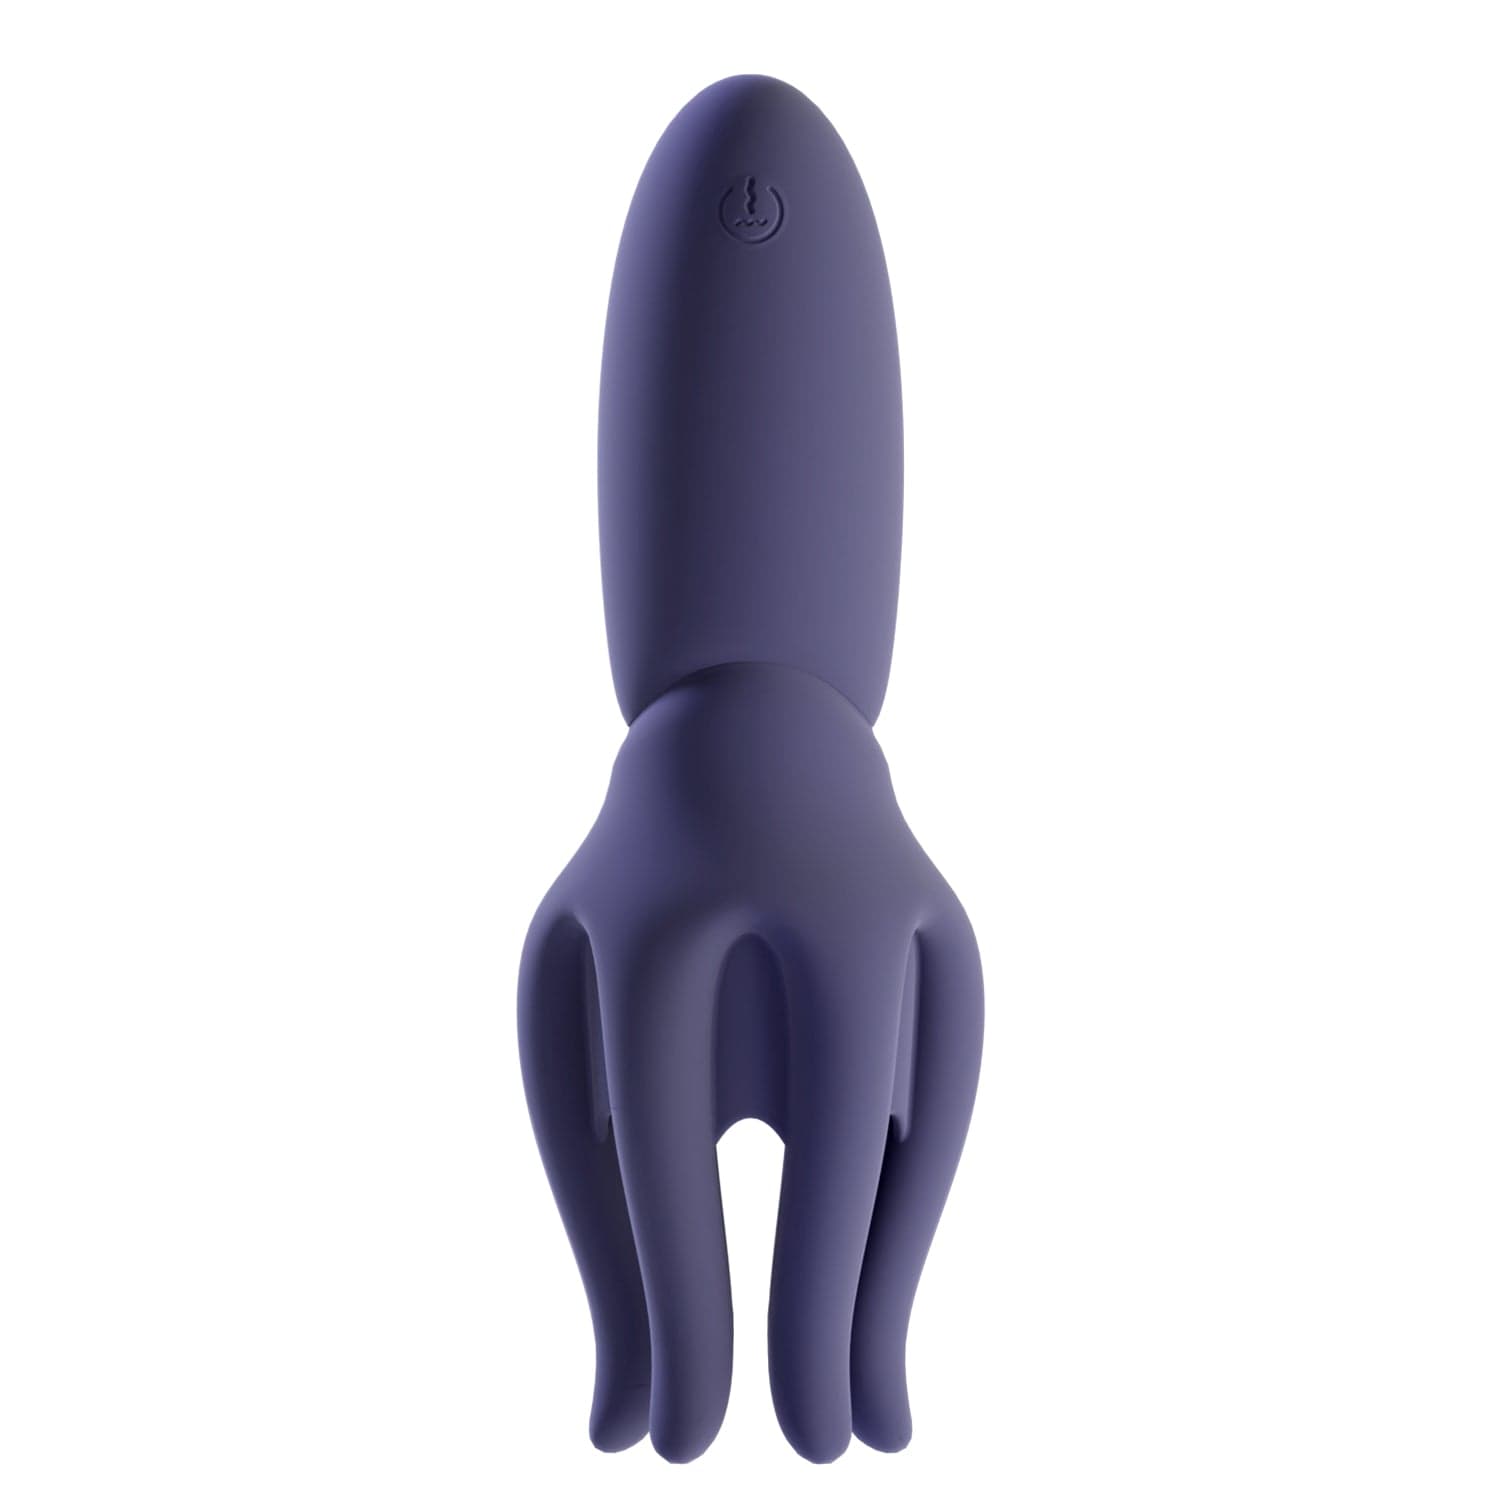 Galaku Octopus tentacle Delay Trainer For Him Vibrator